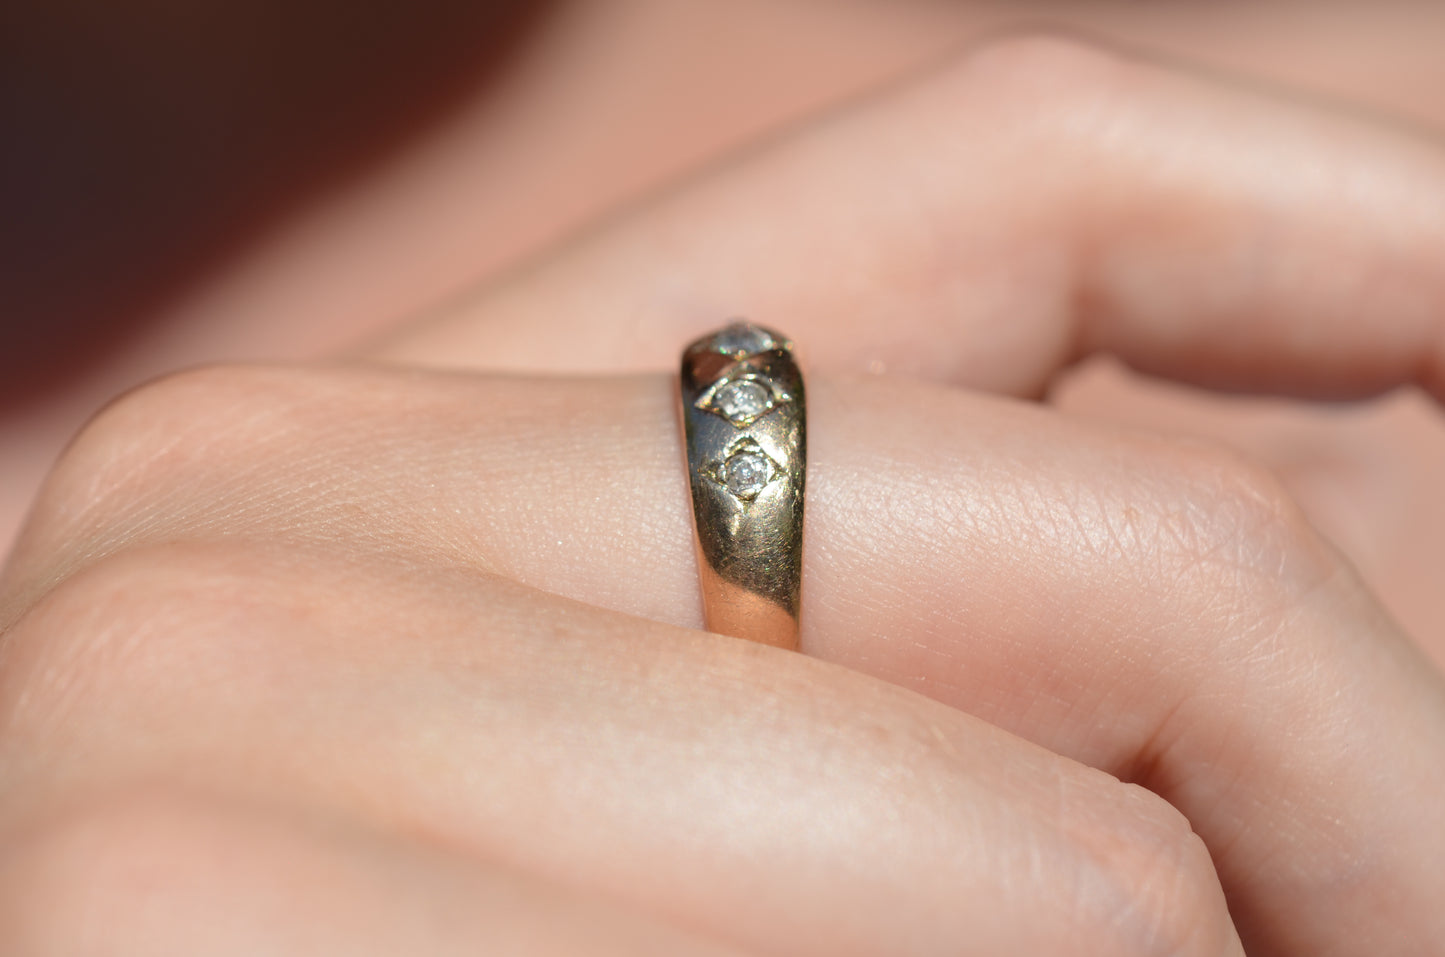 A tightly cropped macro of the ring on the right middle finger of a Caucasian model. The ring is shown from the side, highlighting the very low rise off the finger.